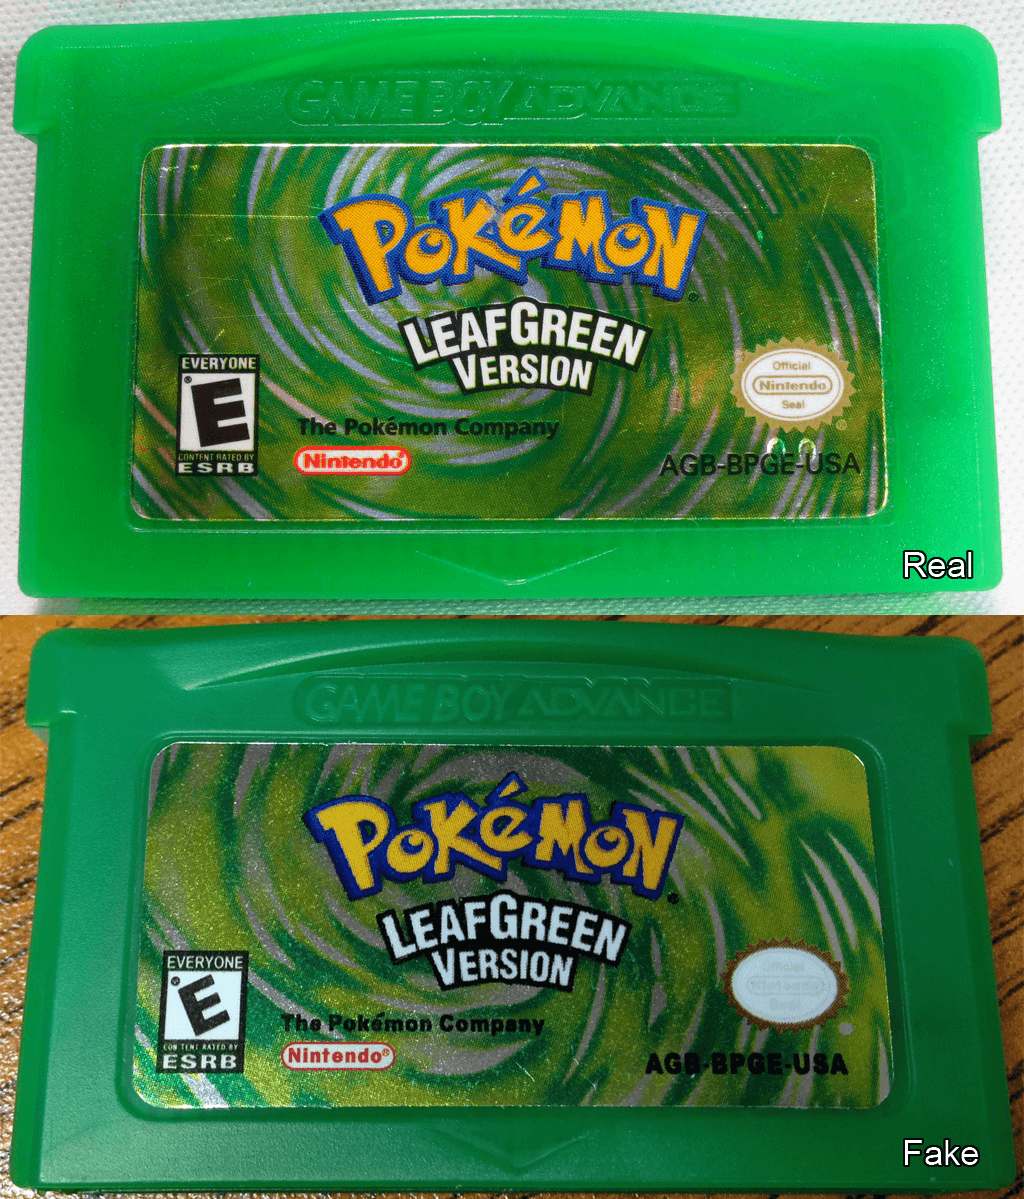 Pokemon Leaf Green Logo - PSA: Spotting the new breed of fake Pokémon LeafGreen (and FireRed ...